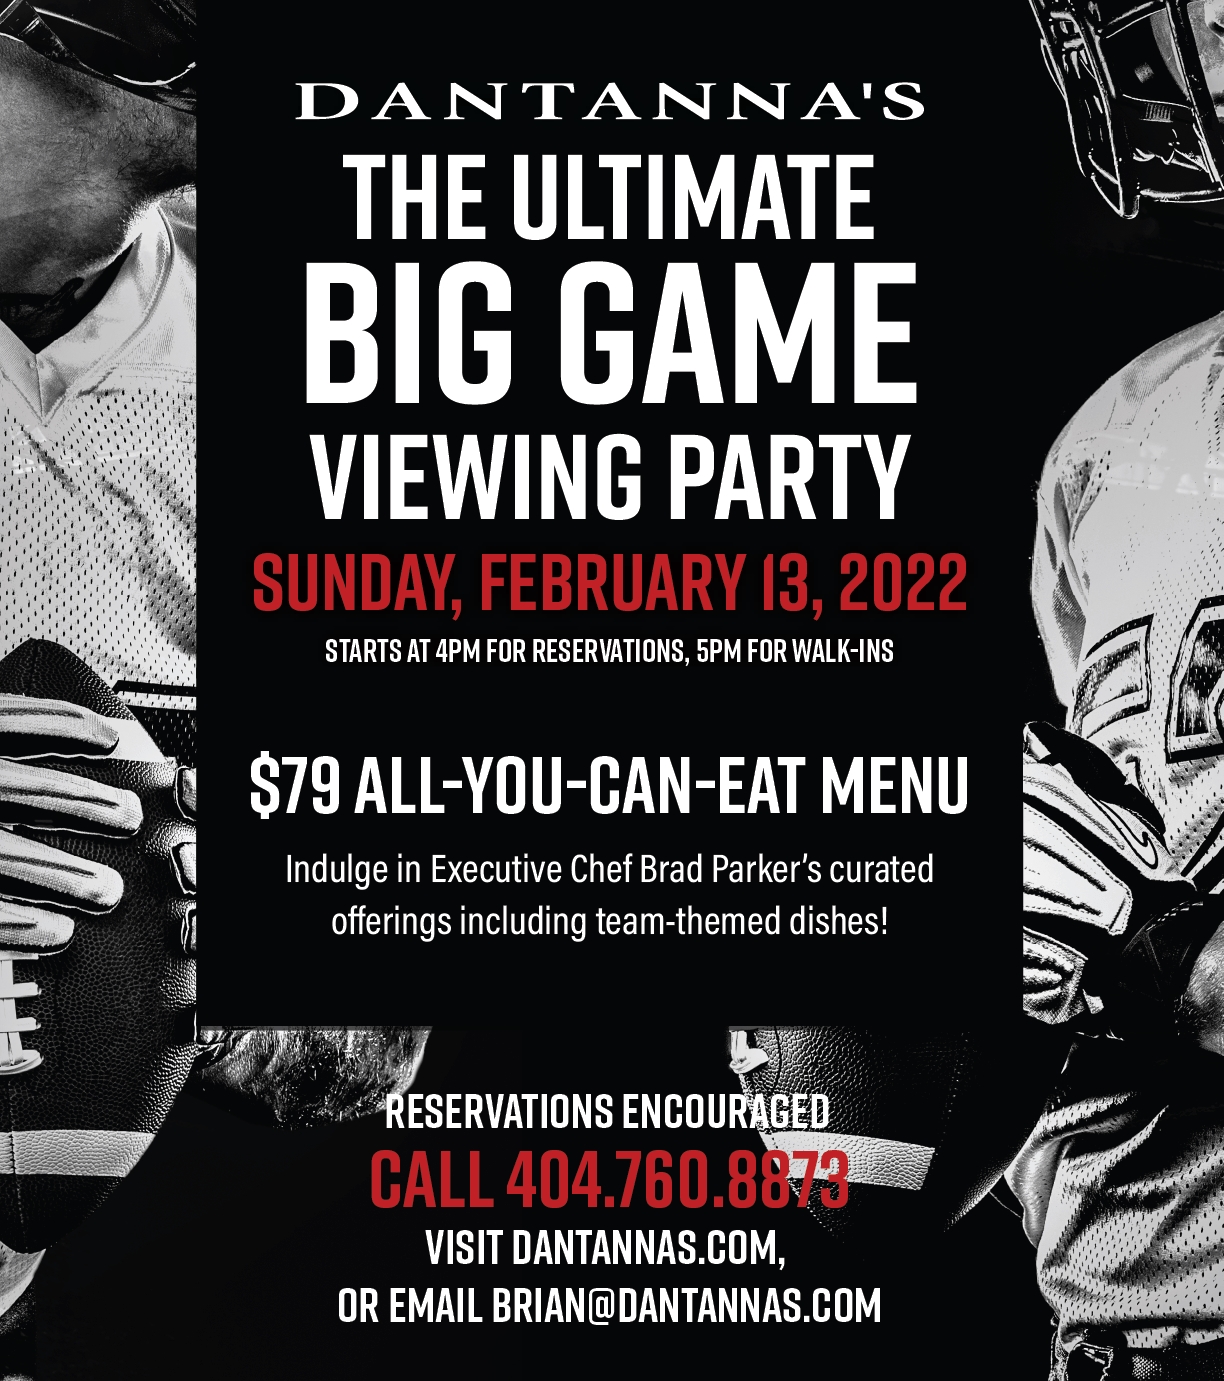 Head To Dantanna’s For The Ultimate Big Game Viewing Party